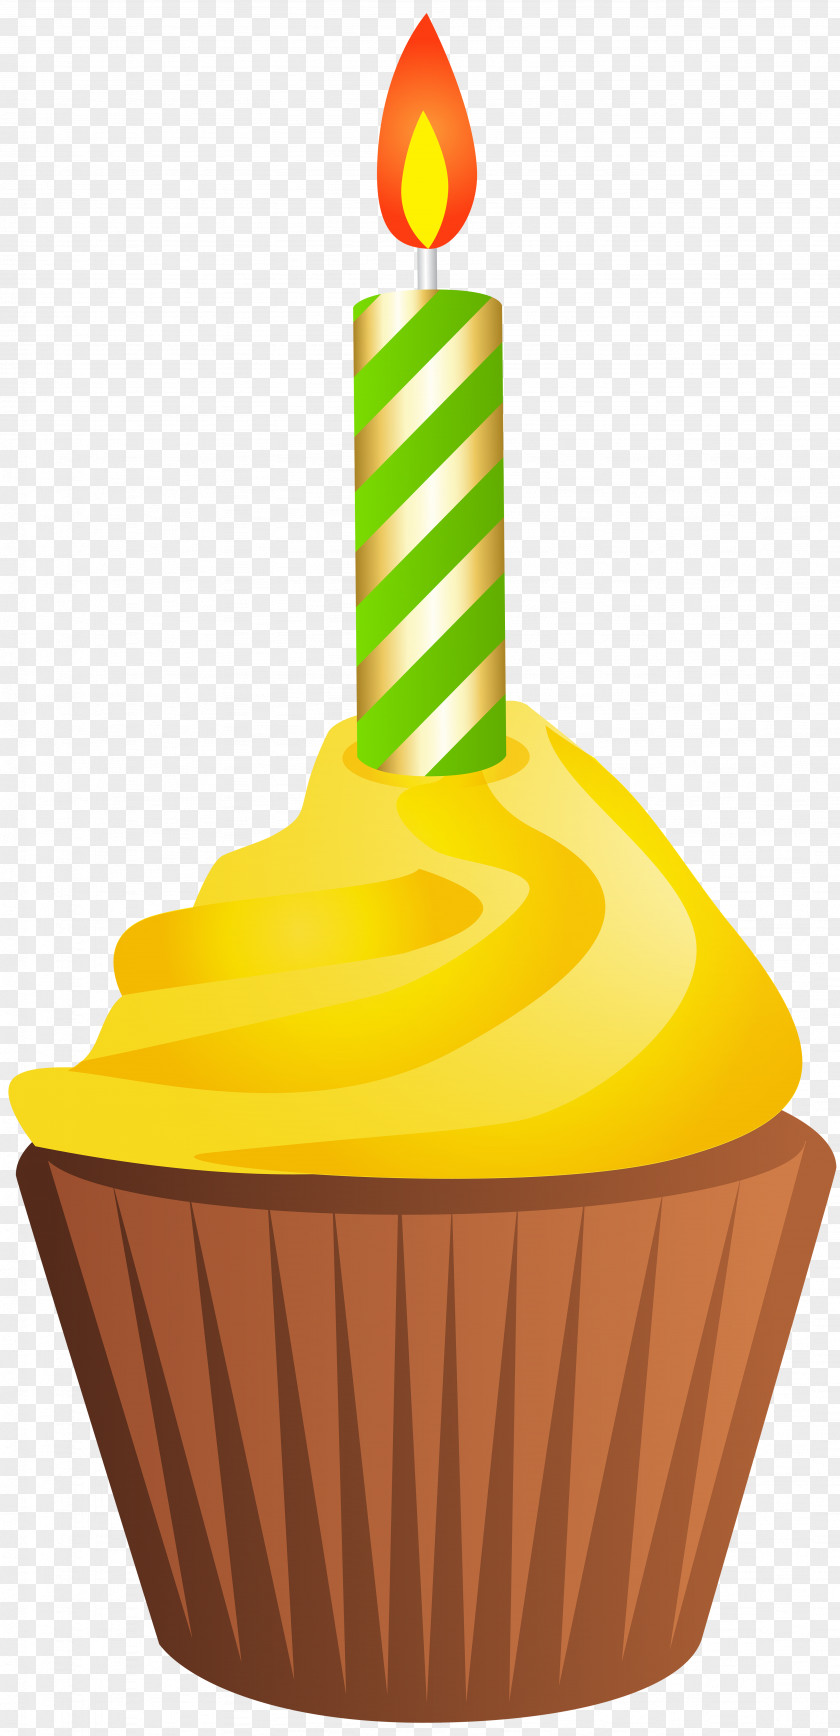 Birthday Muffin With Candle Clip Art Image Cake Cupcake PNG